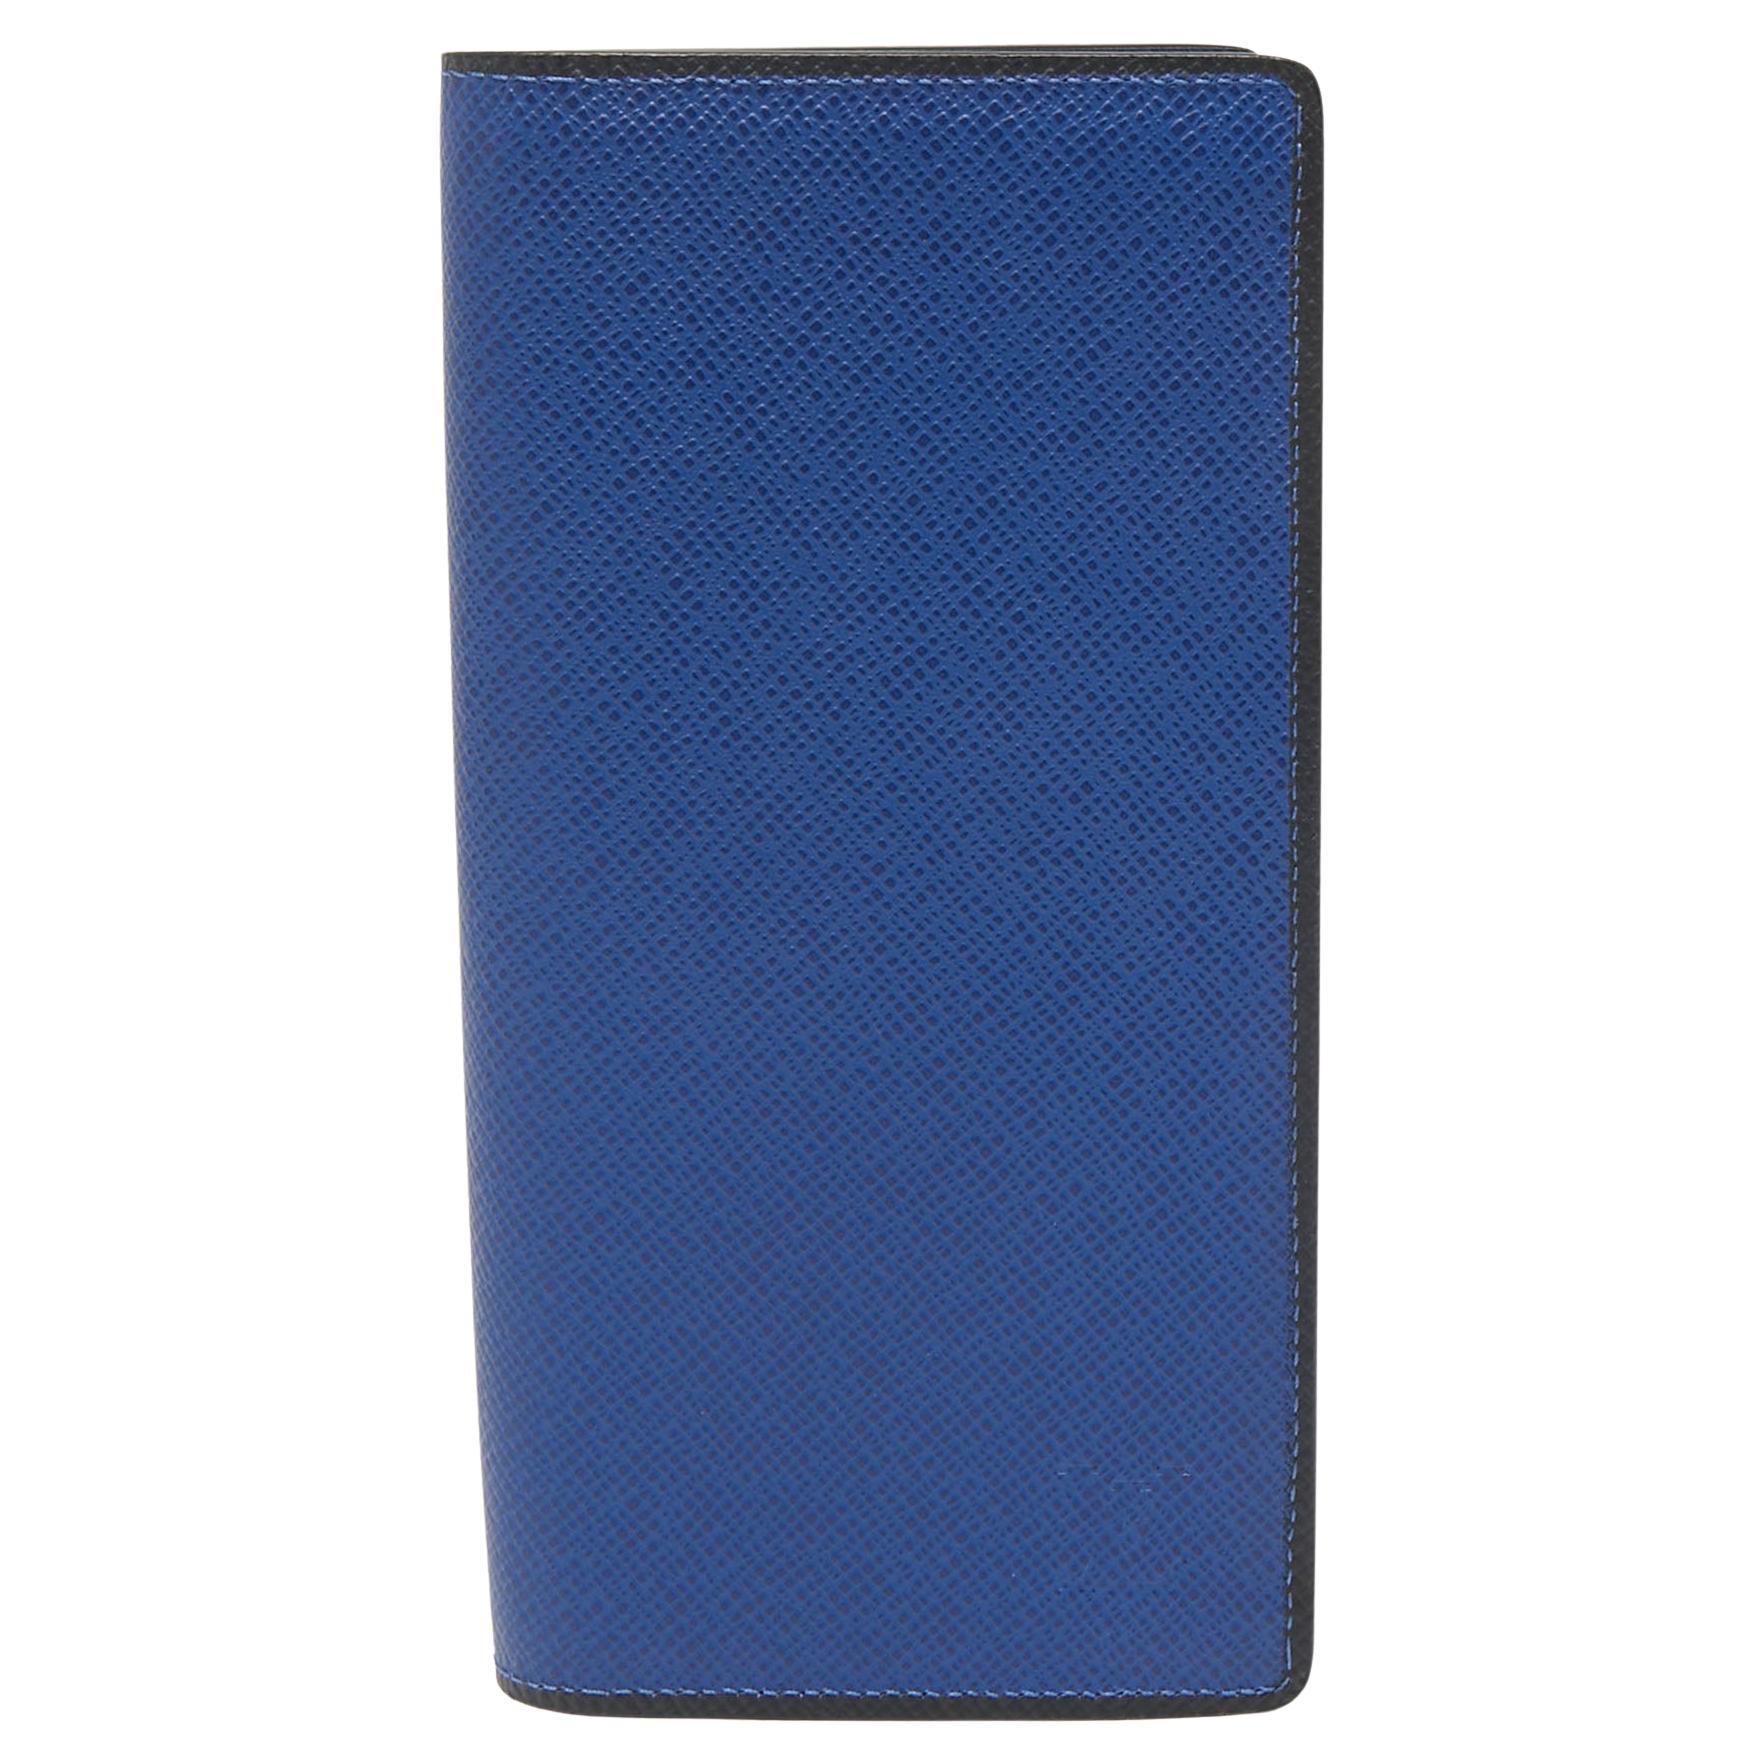 Louis Vuitton Brazza Wallet Room With A View Collection dreamlike blue